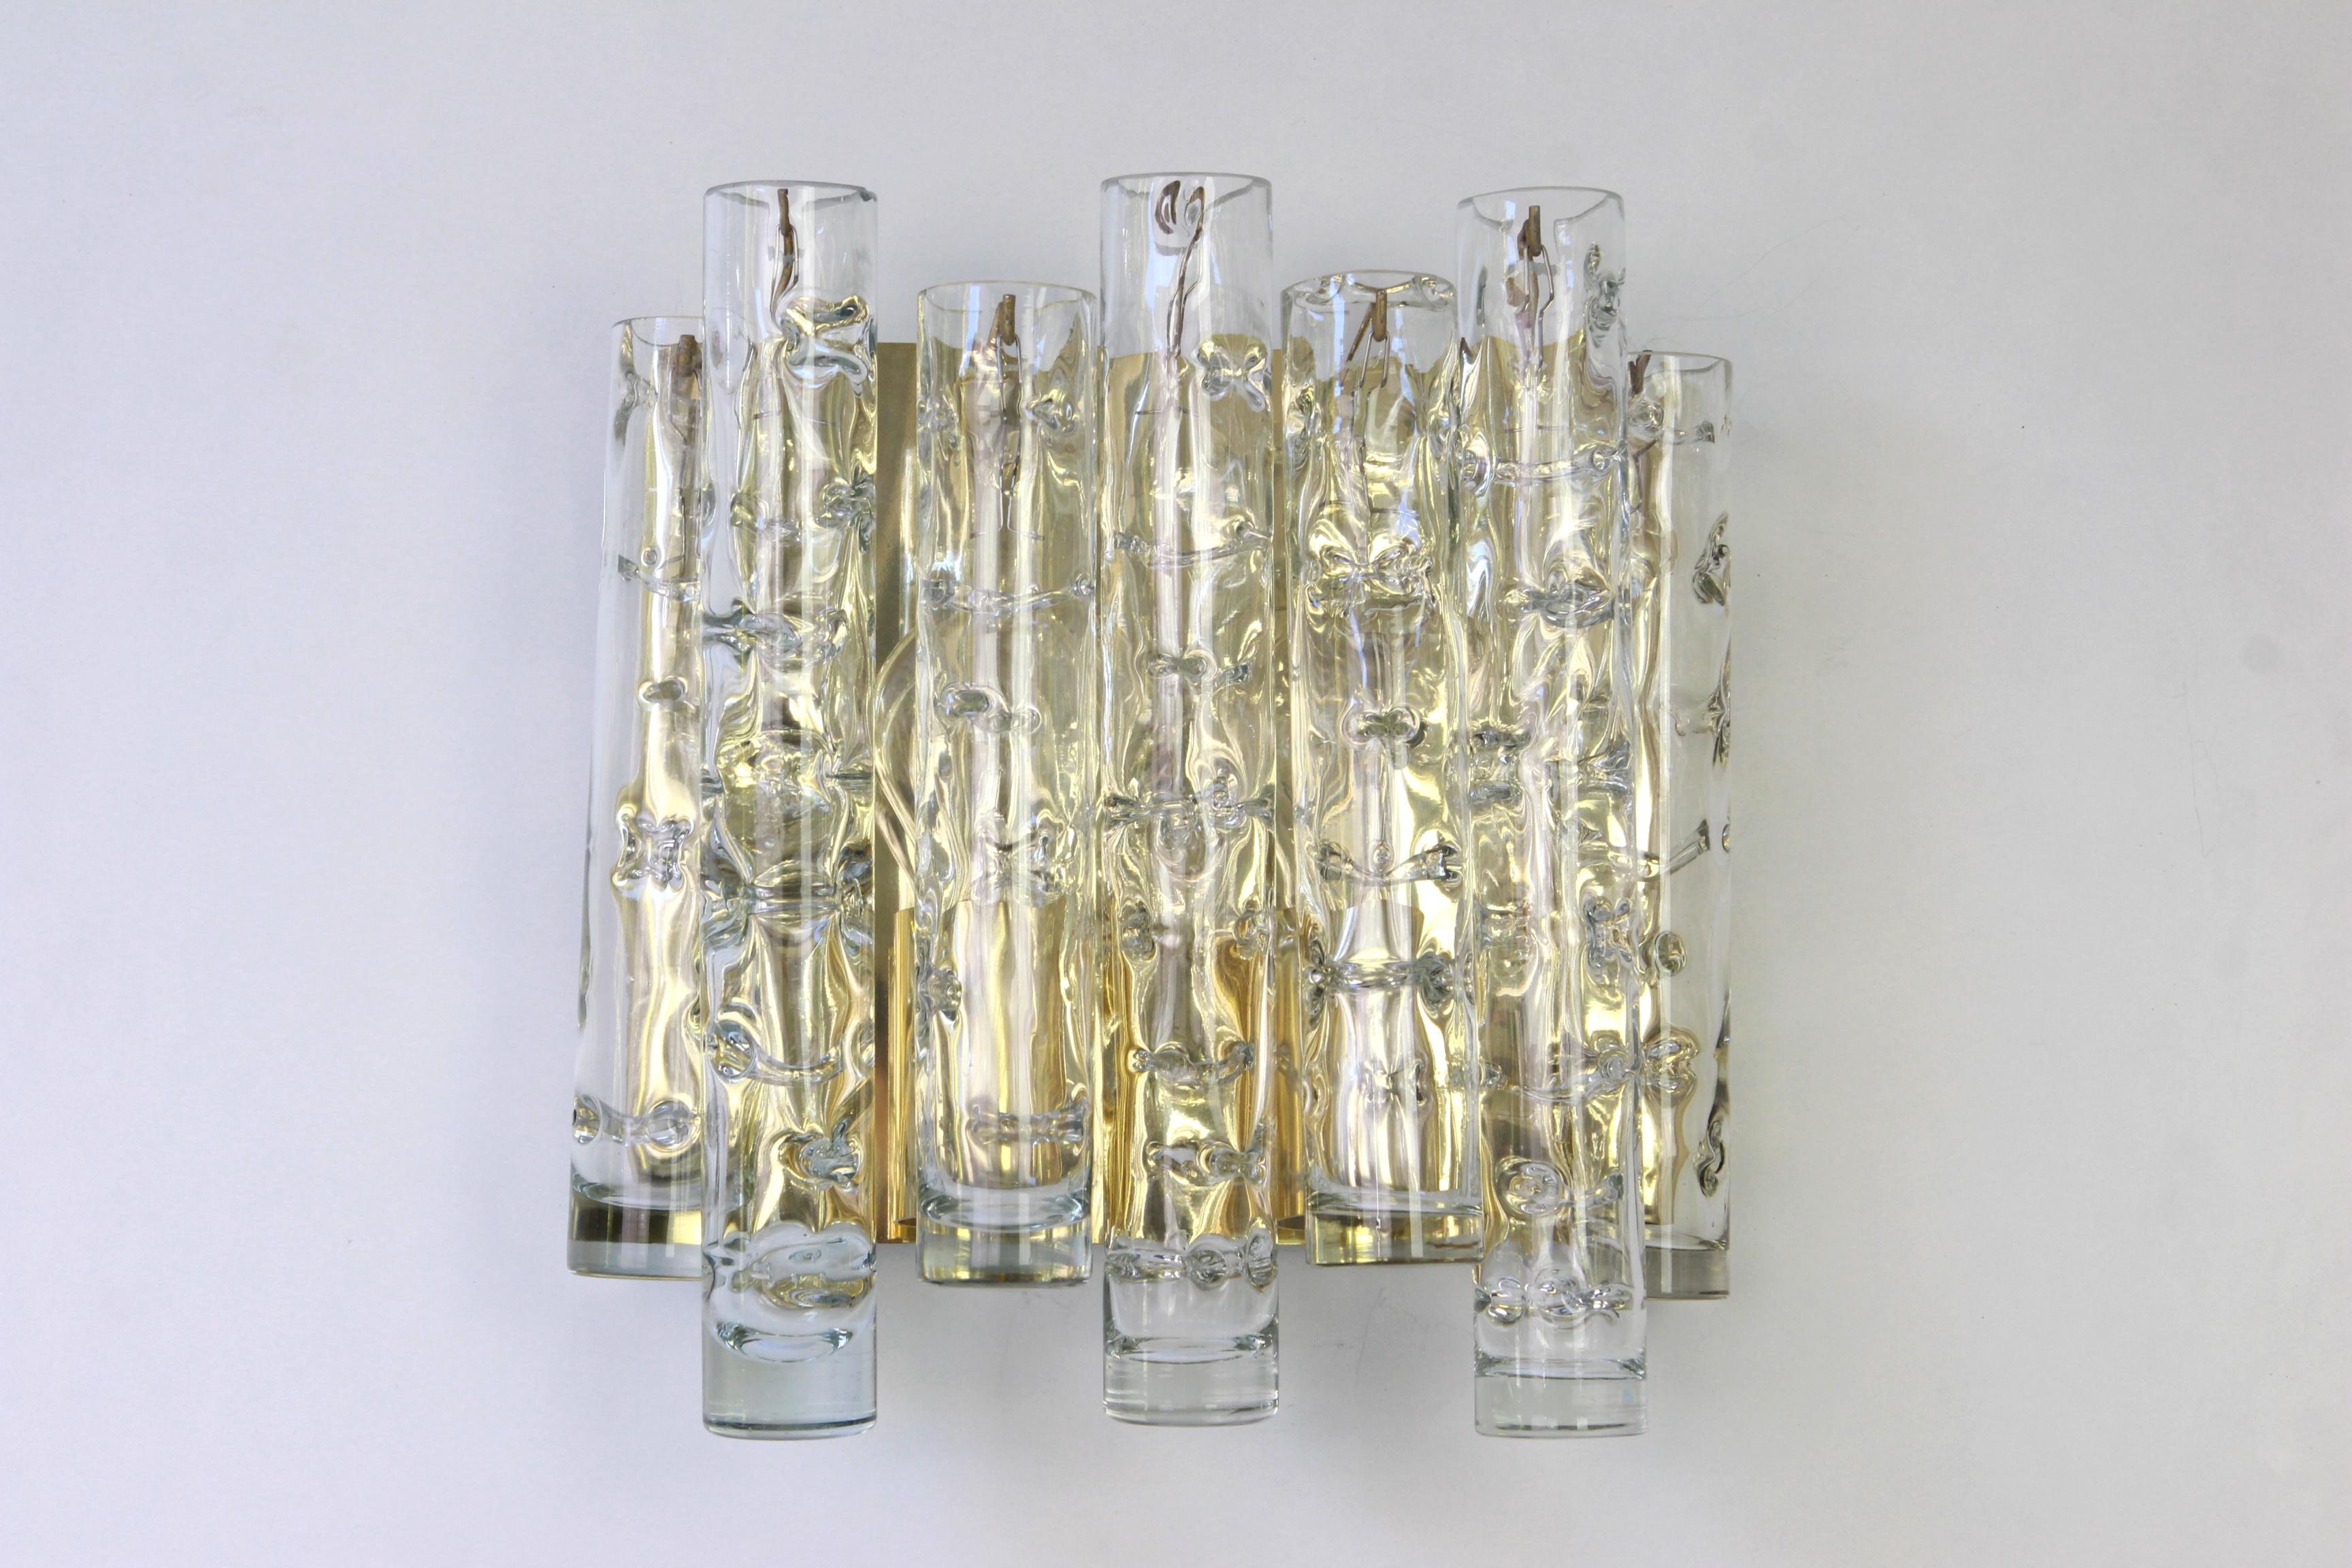 Pair of Large Murano Glass Wall Sconces by Doria, Germany, 1960s For Sale 2